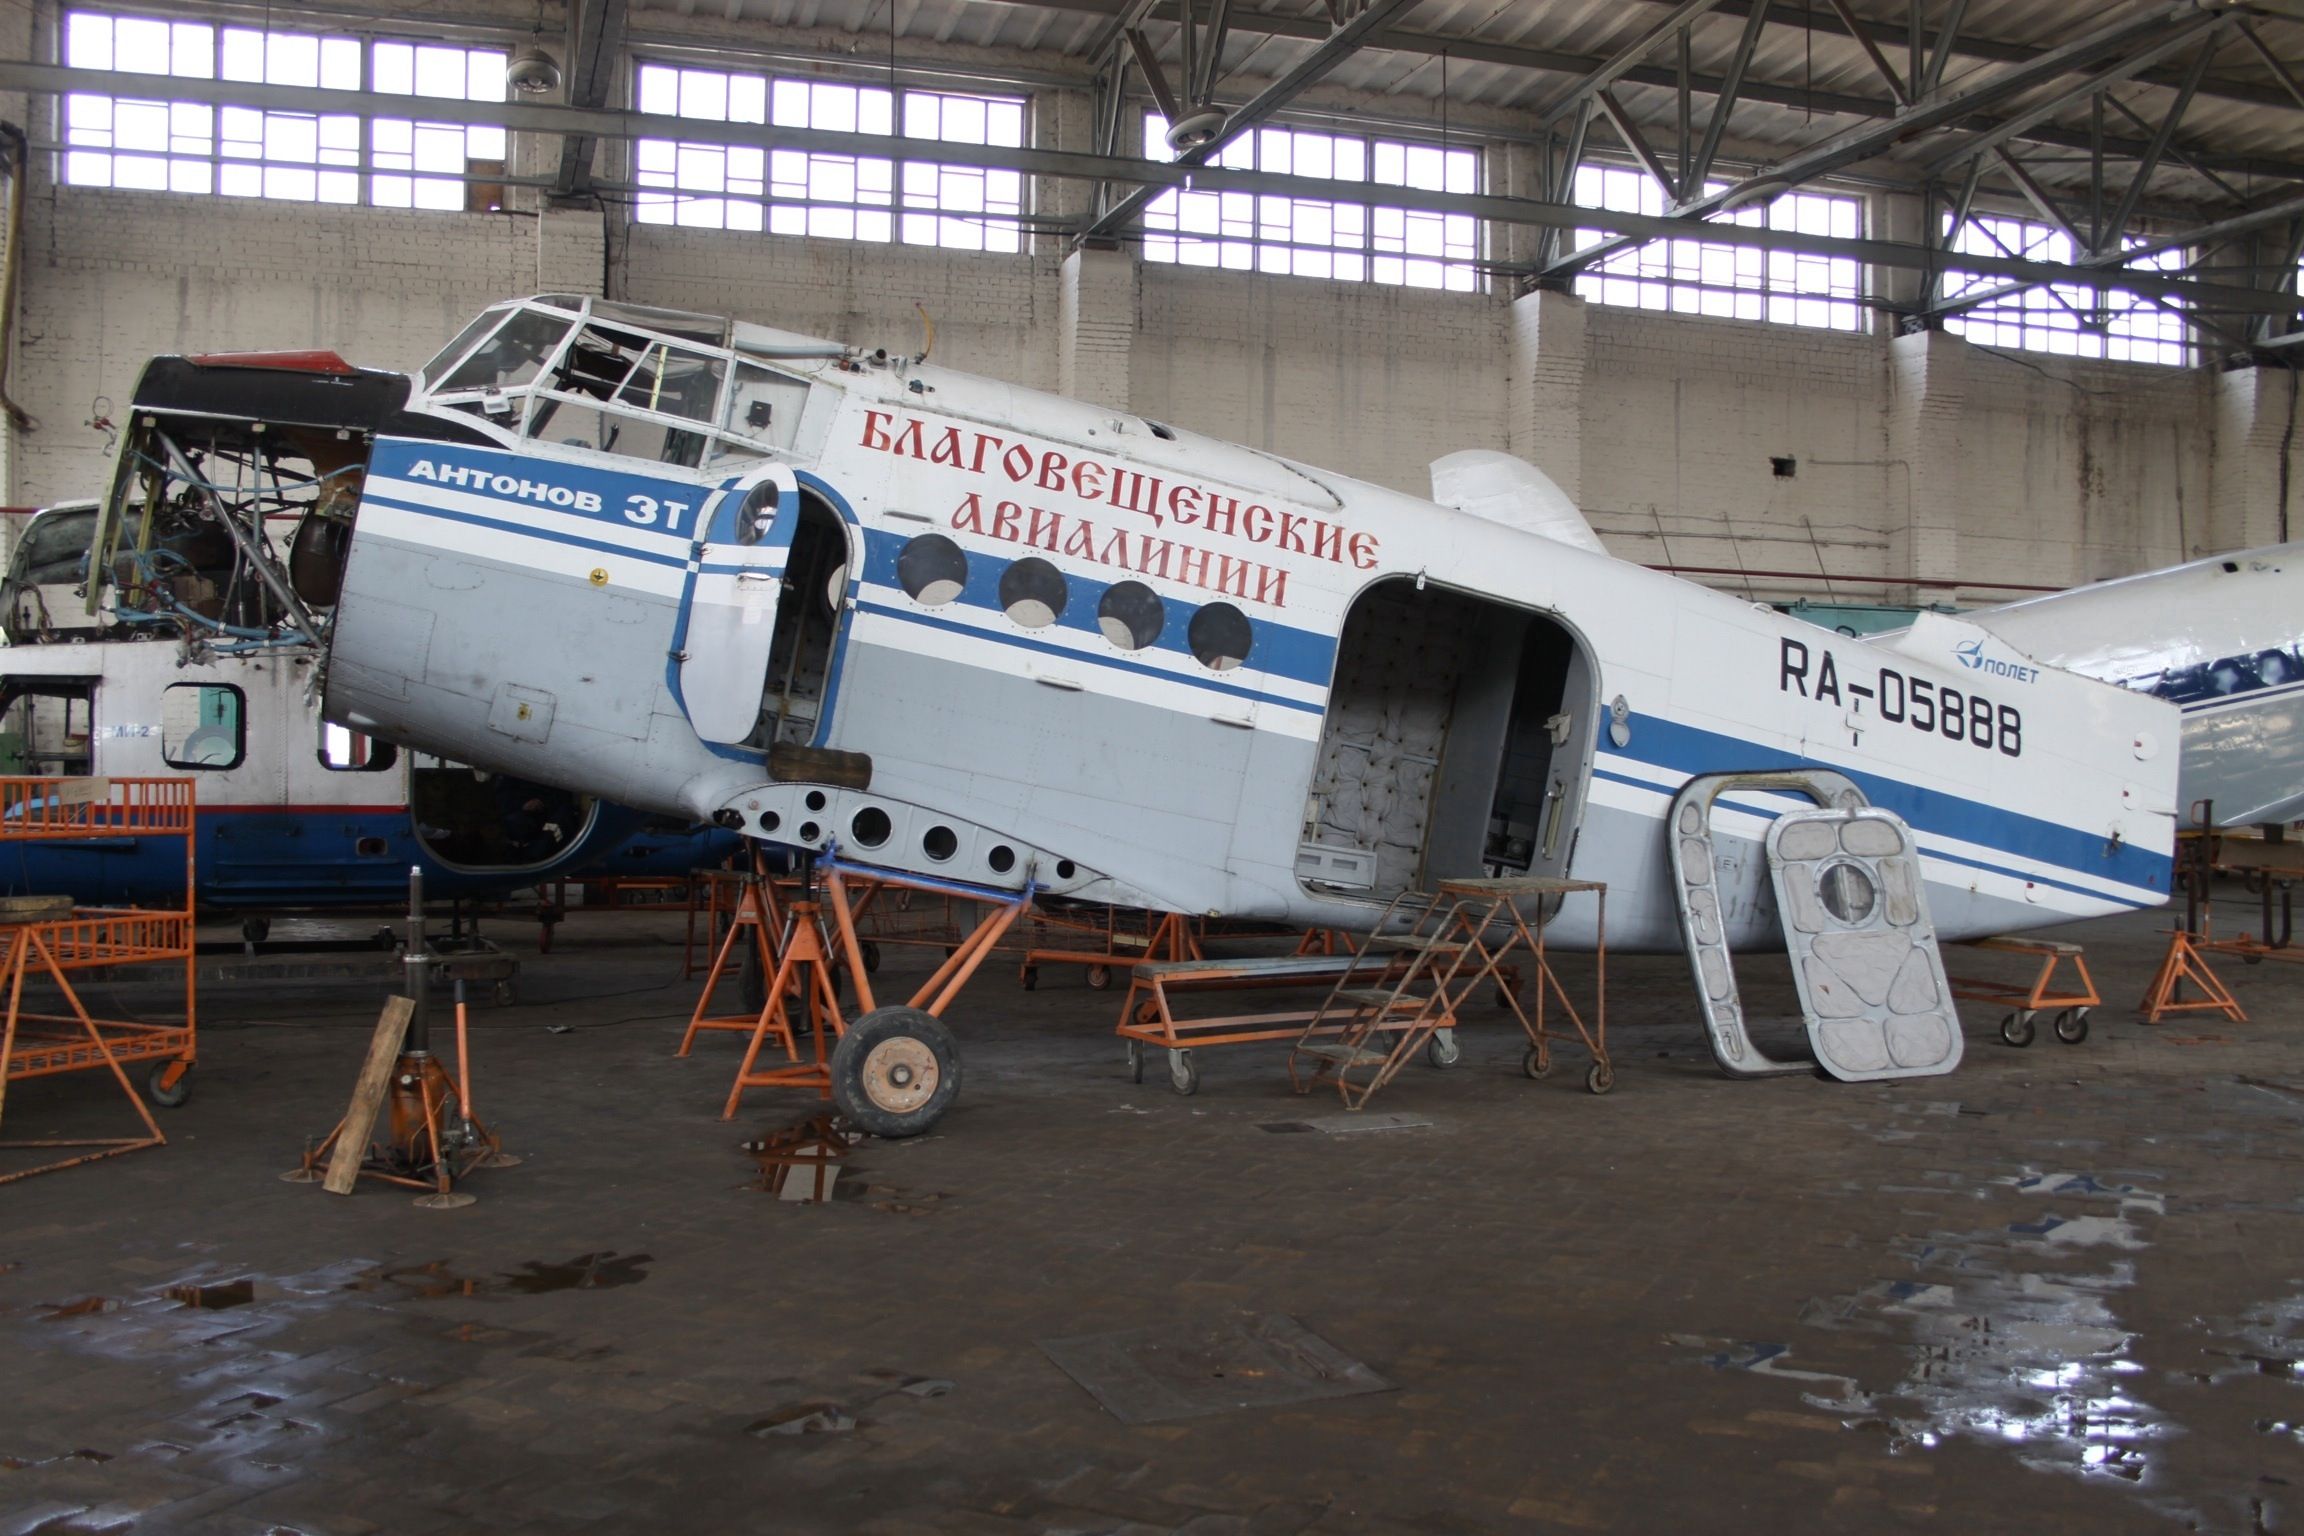 A white and gray transport aircraft with Russian lettering on its side being assembled in a hangar.